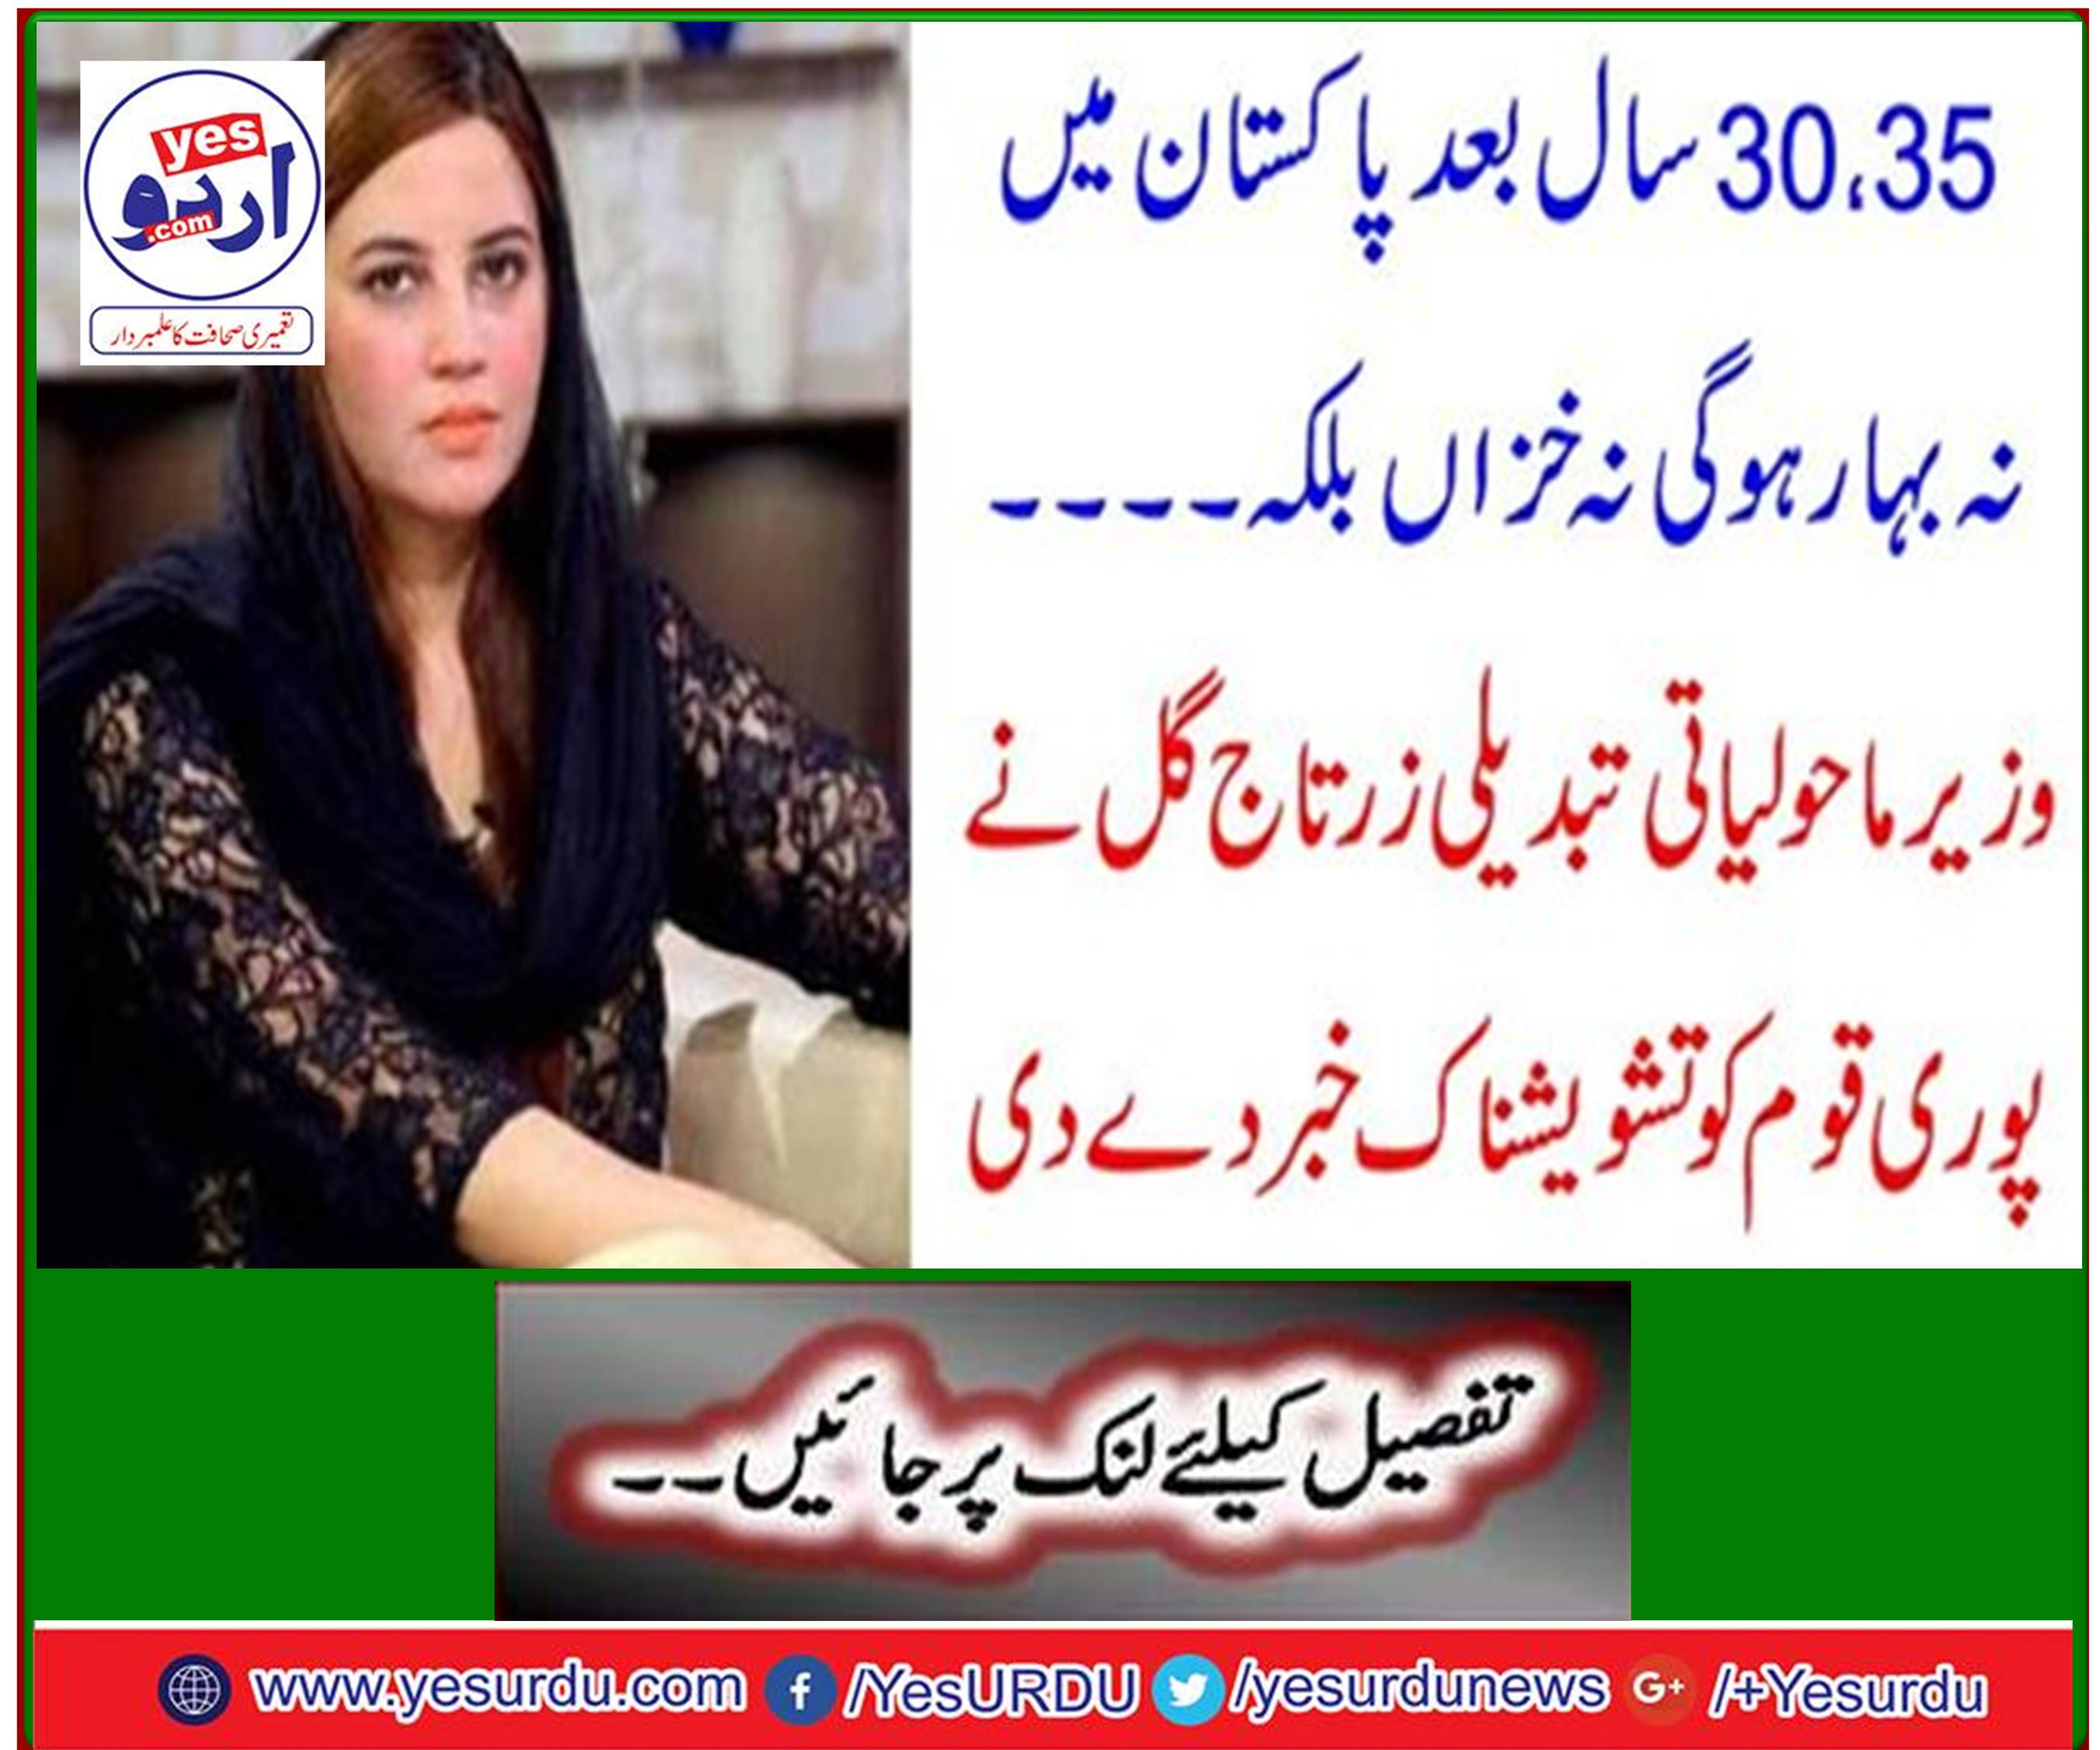 Minister for Environmental Change Zartaj Gul gave alarming news to the entire nation